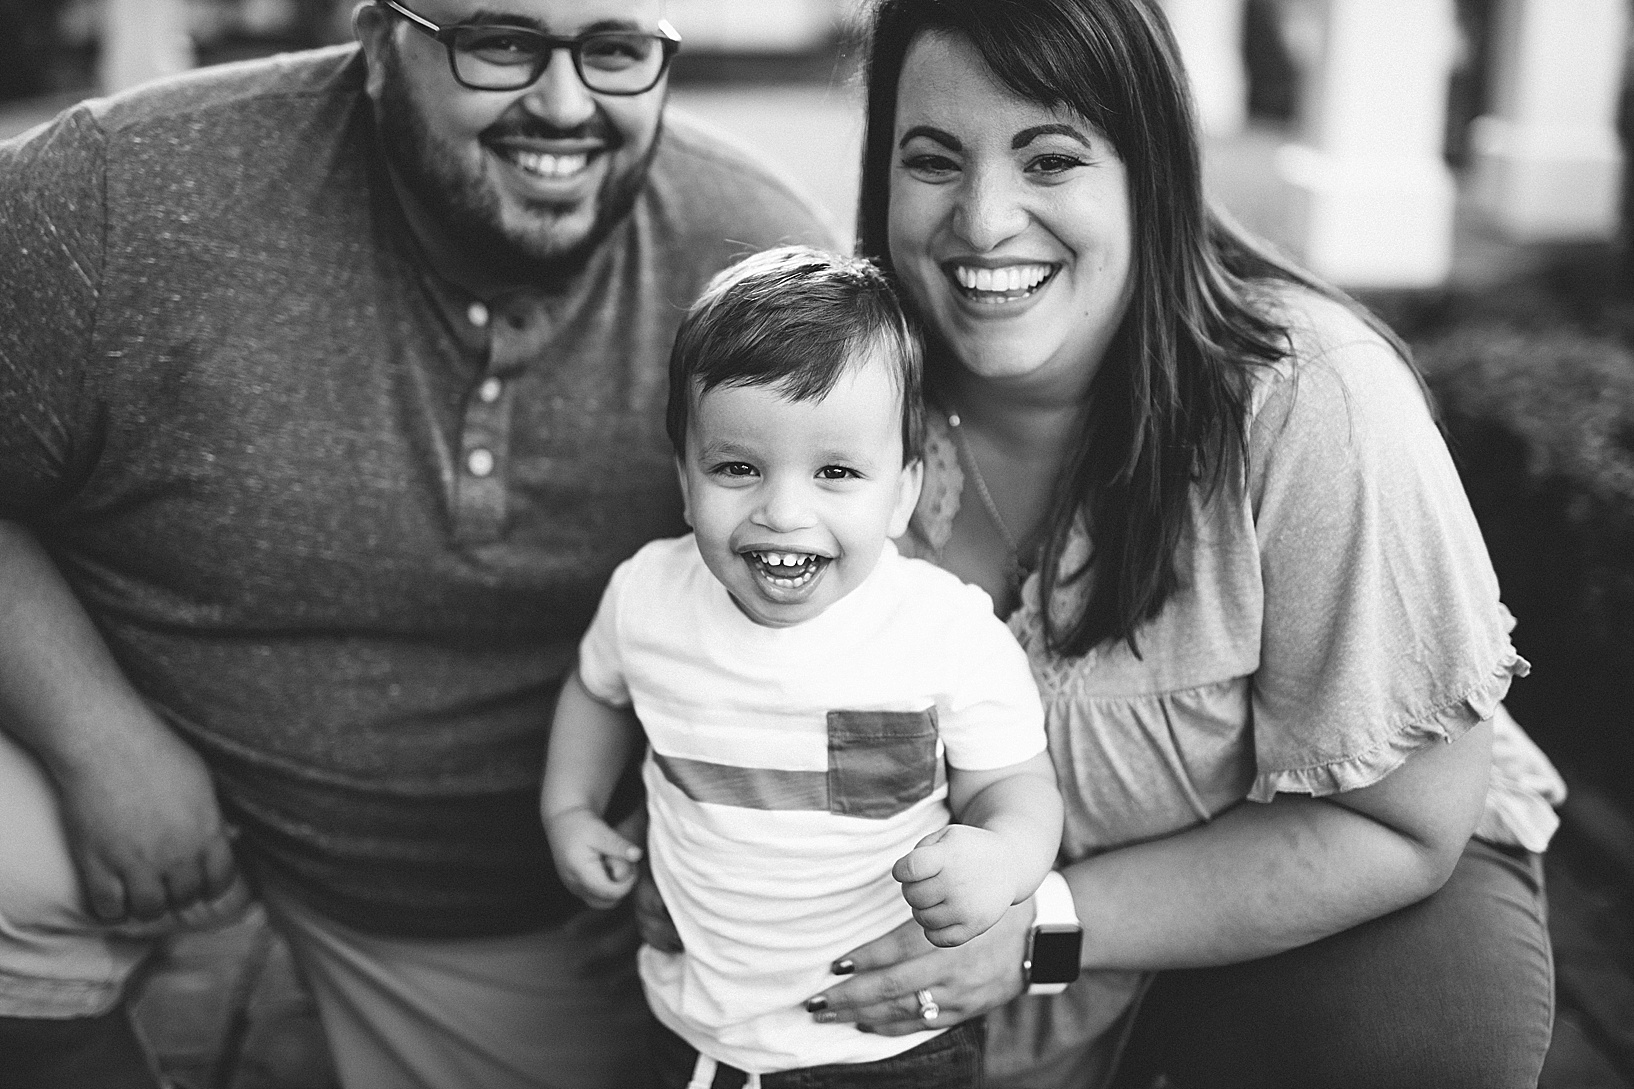 Man and woman crouch down next to their young son while all three smile at camera